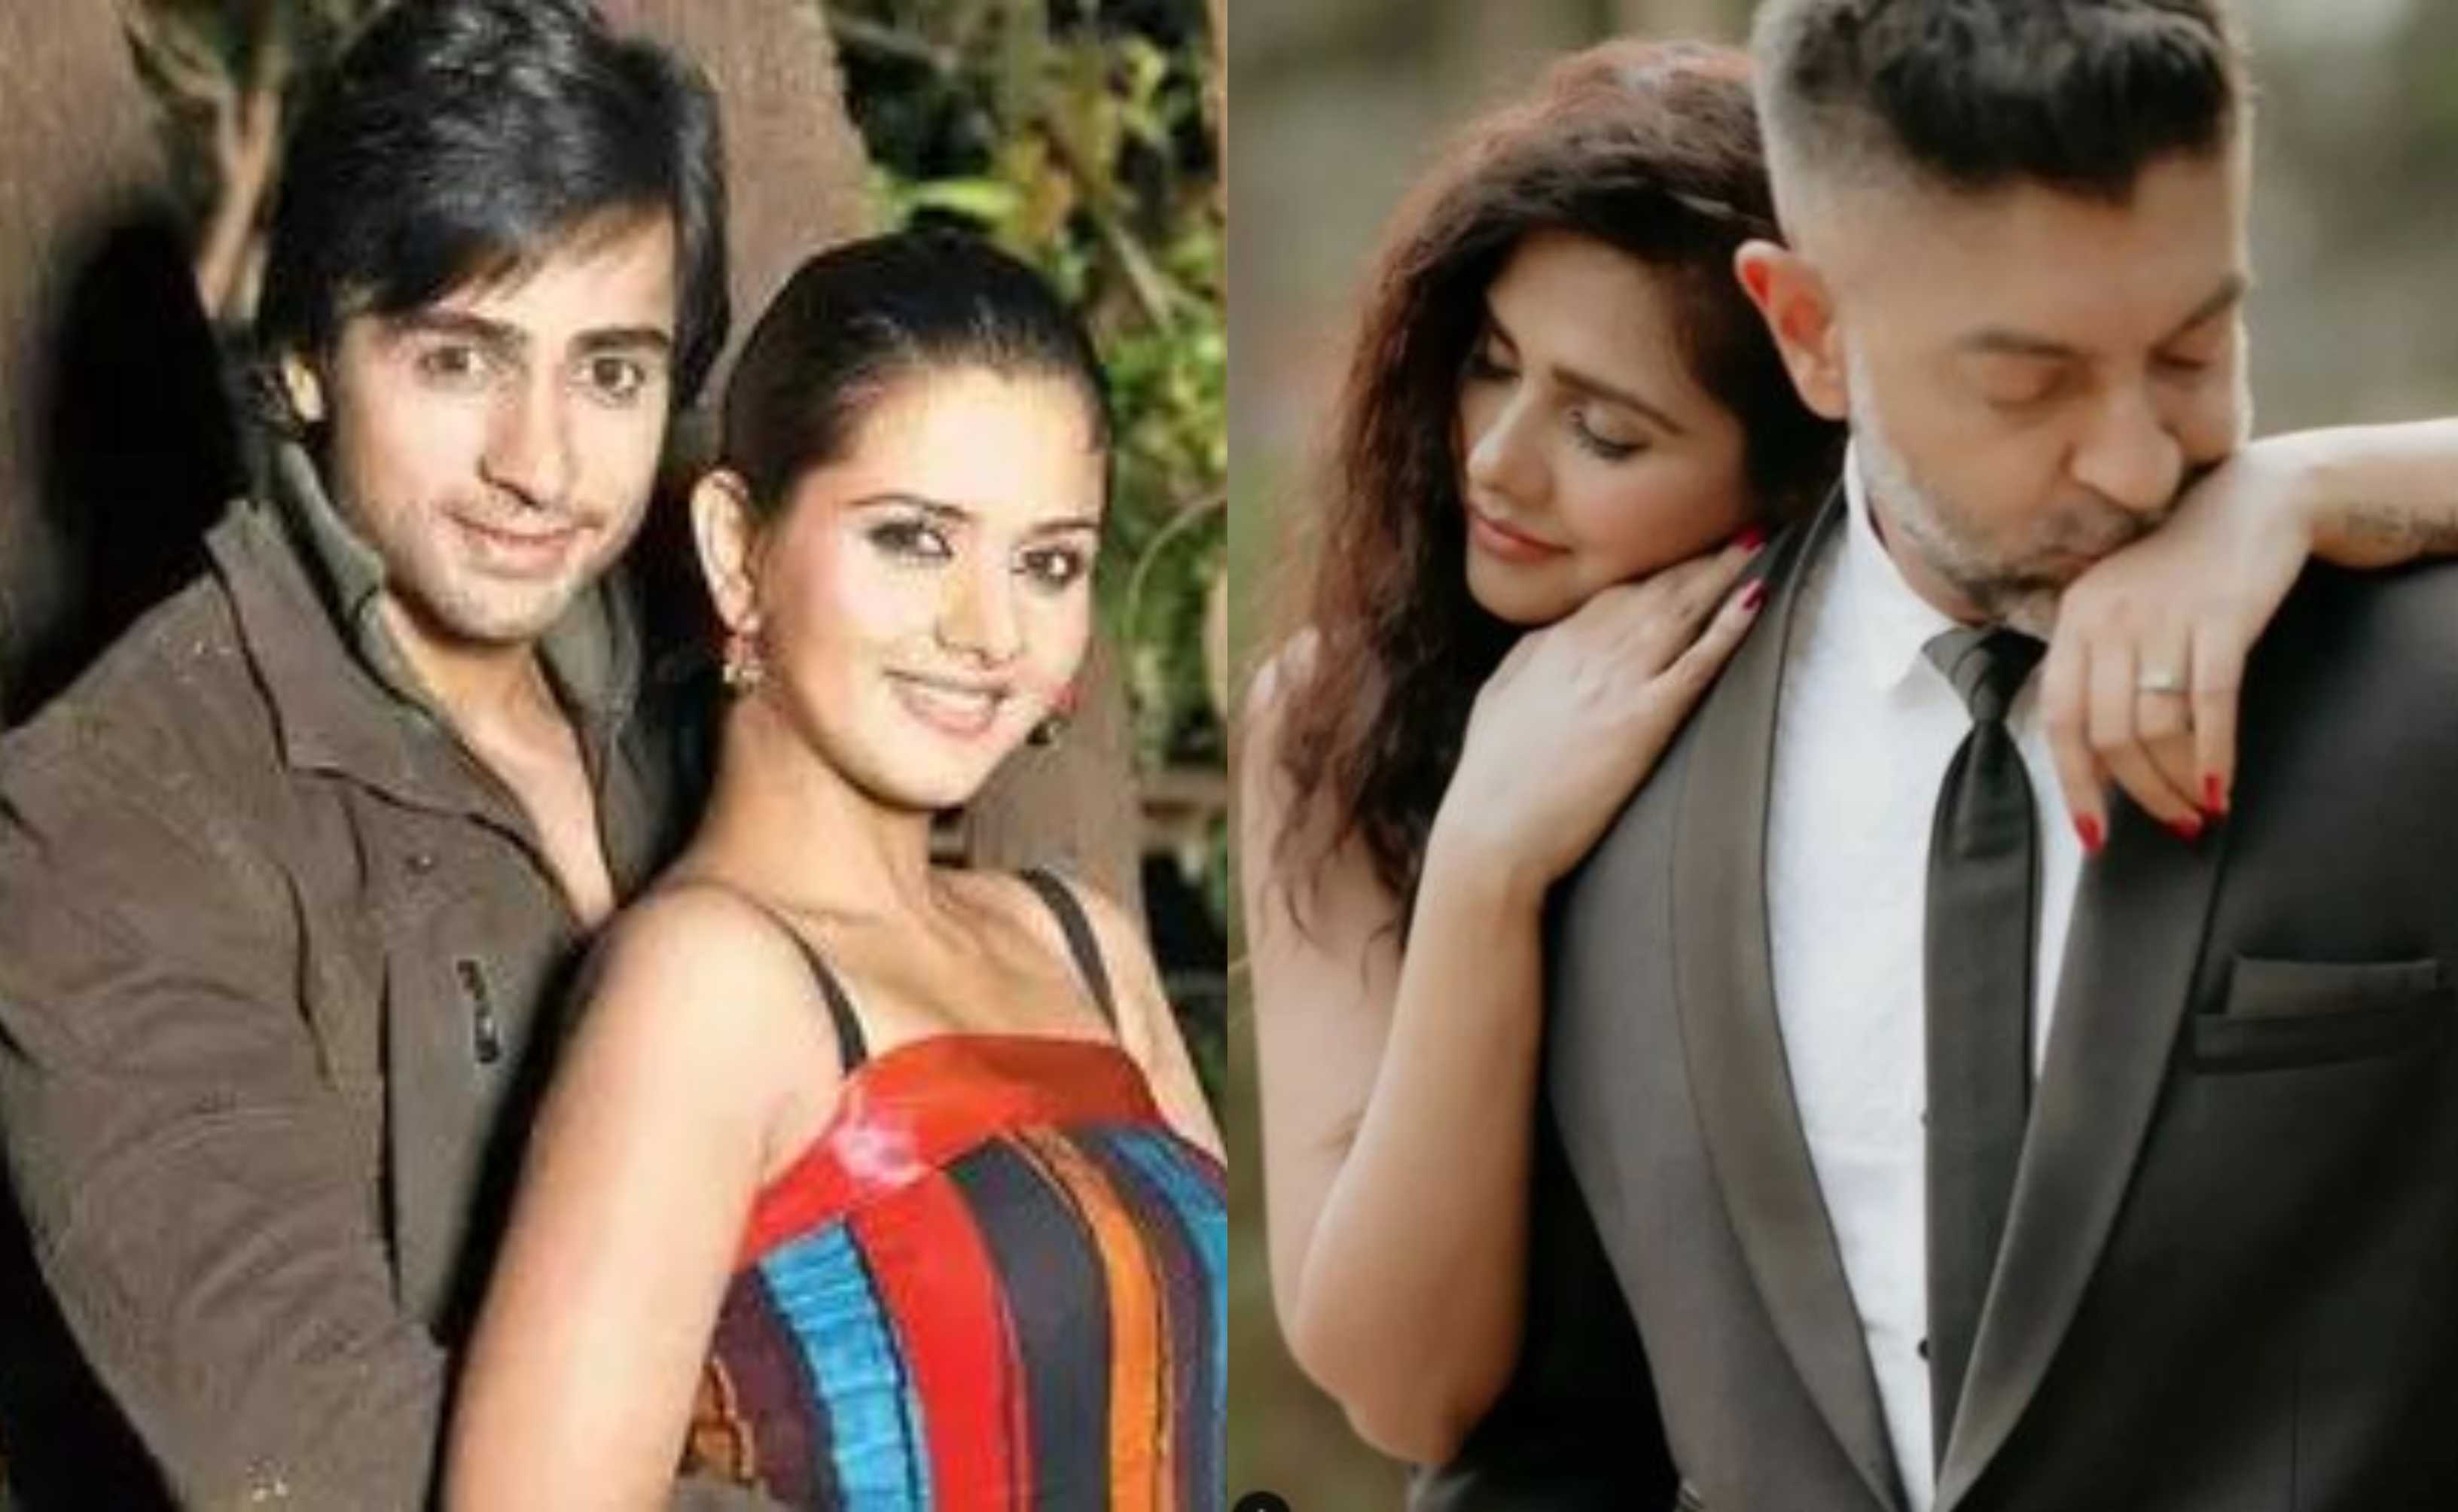 Shalin Bhanot's ex-wife Dalljiet Kaur to tie the knot with US-based Nikhil Patel, reveals it was love for their children that connected them